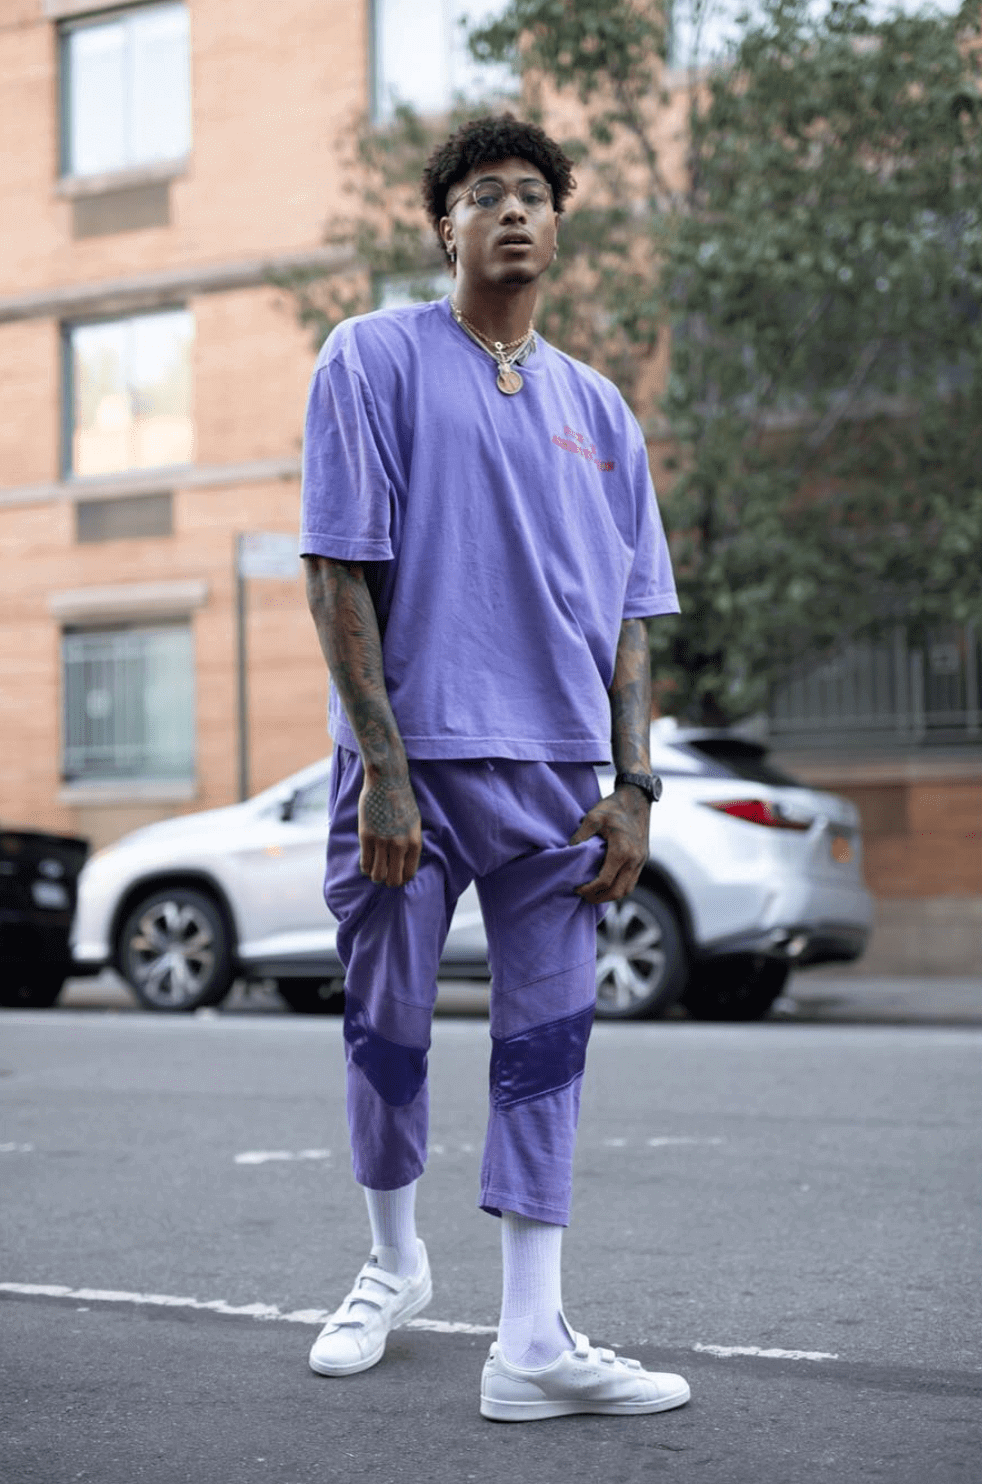 fashion kelly oubre